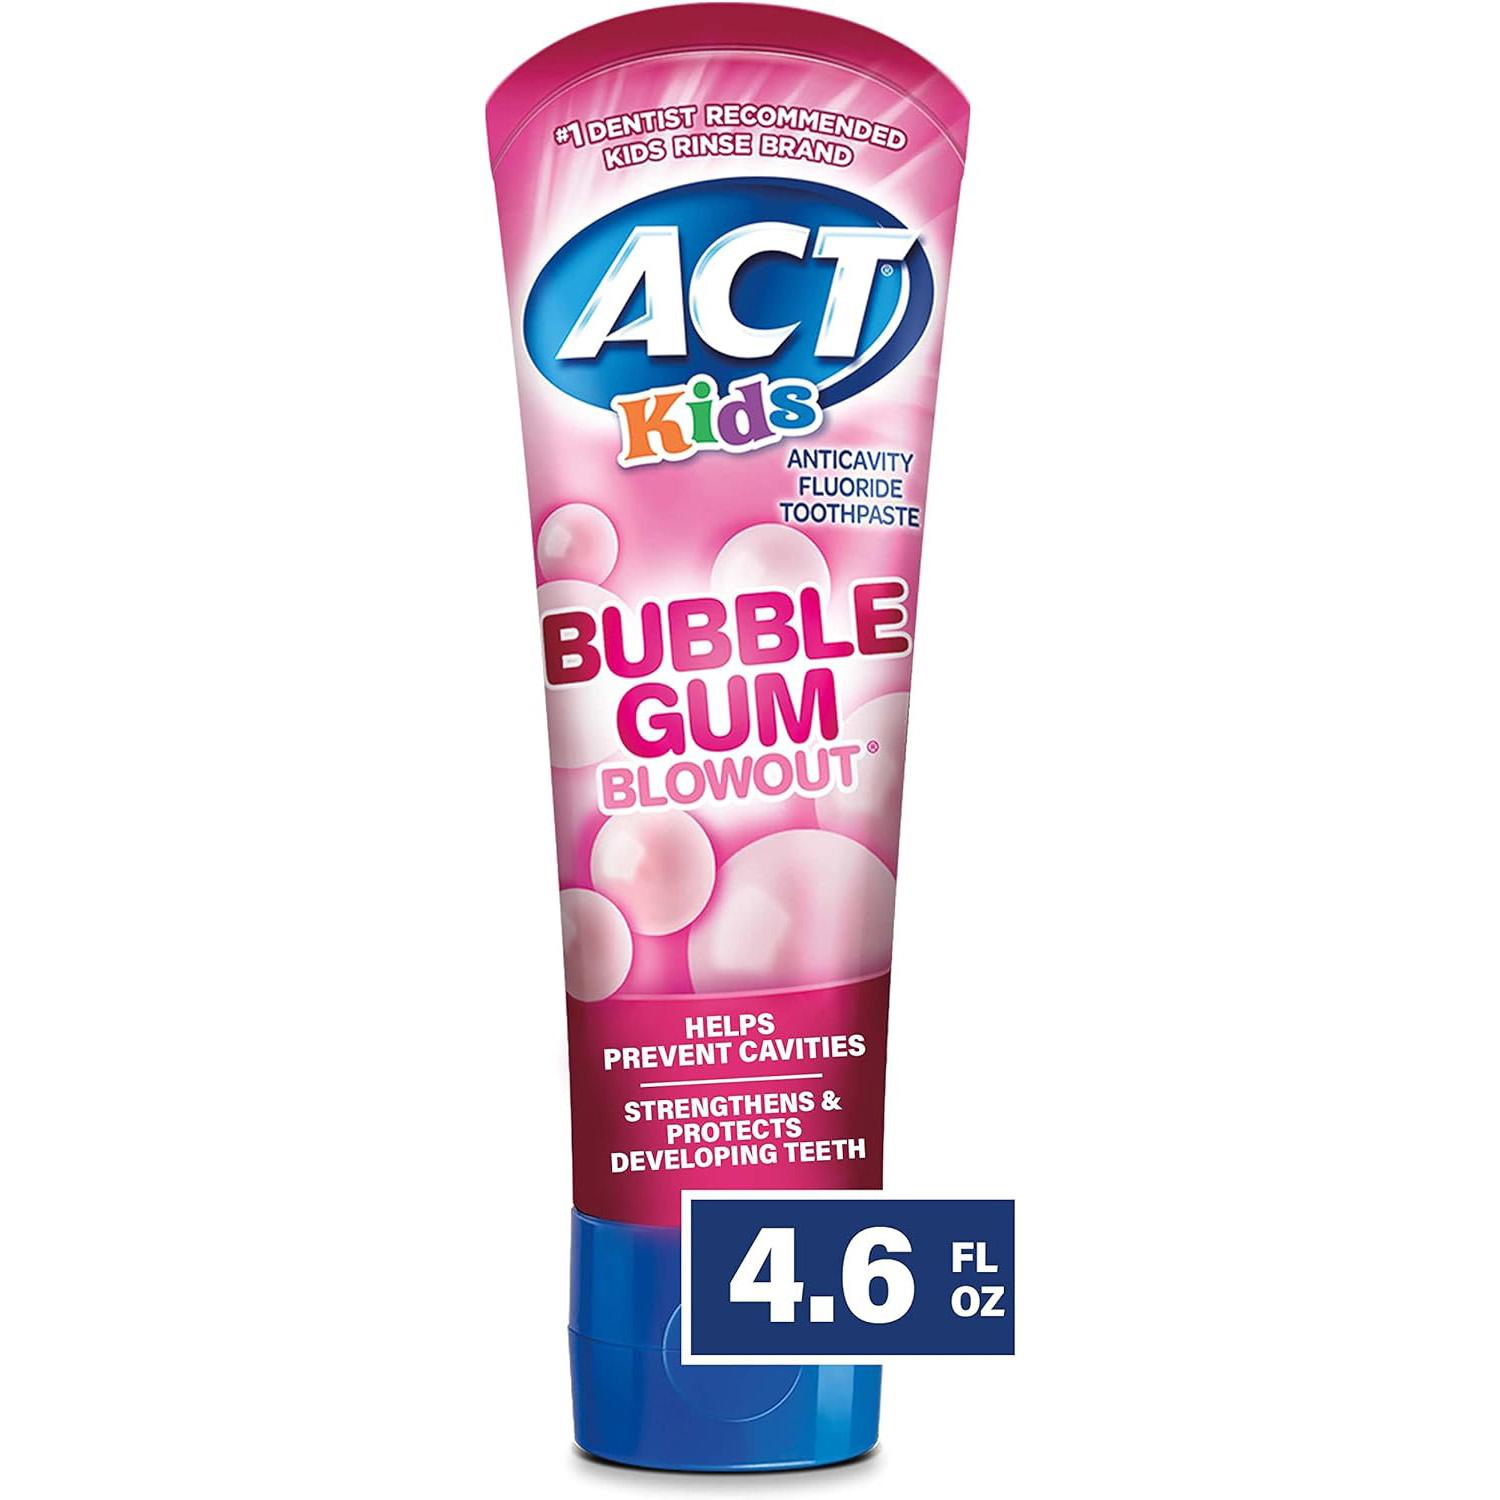 ACT Kids Anticavity Fluoride Toothpaste Bubble Gum Blowout for $1.84 Shipped